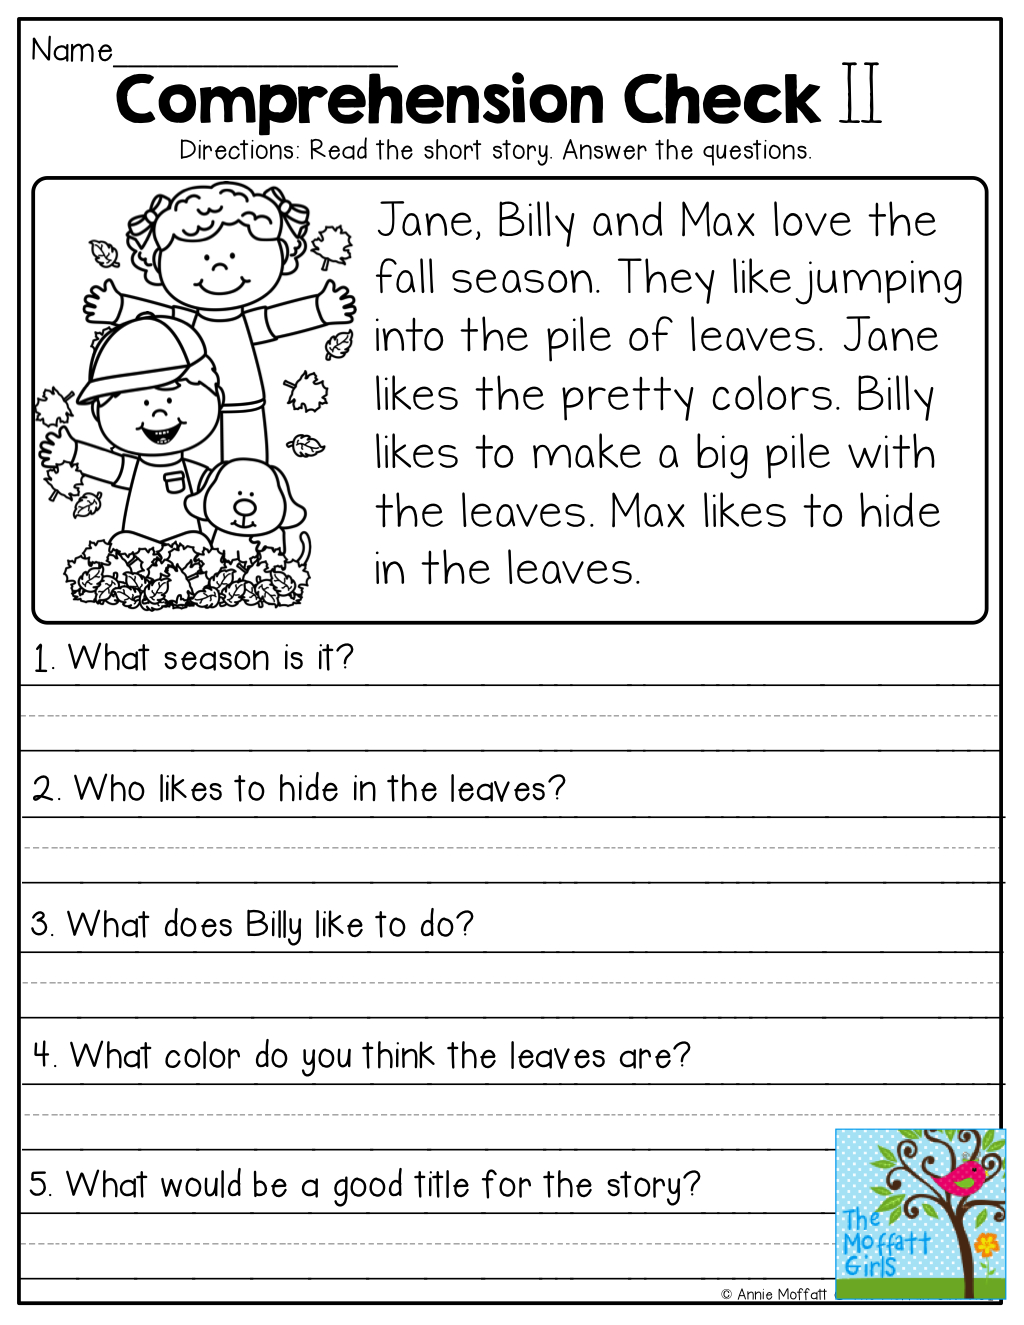 free-printable-short-stories-with-comprehension-questions-free-printable